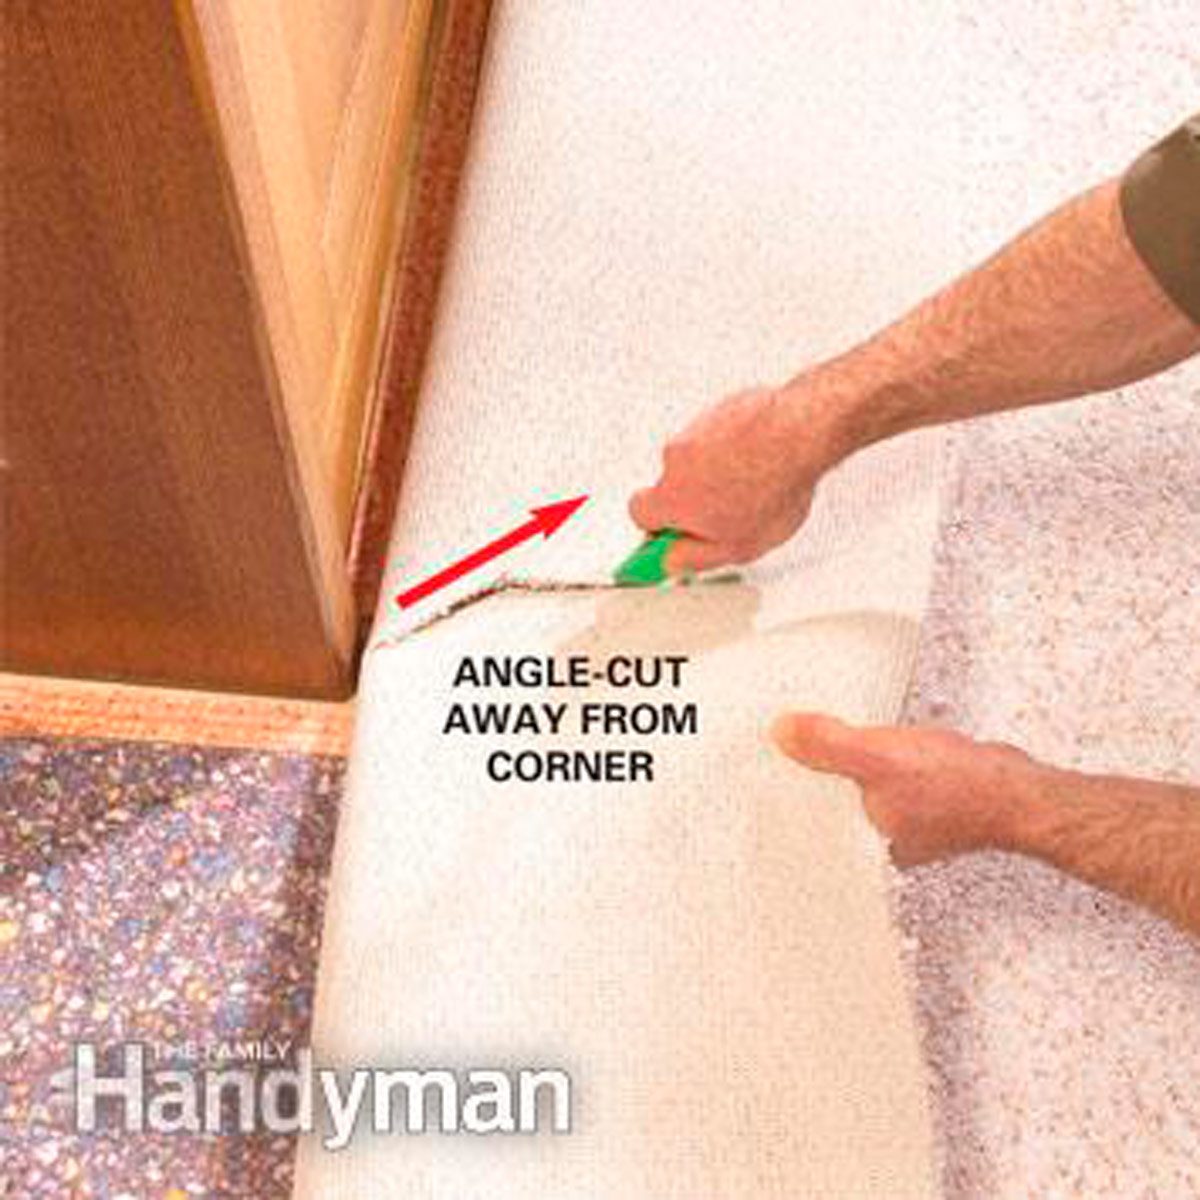 How to Patch a Carpet Yourself